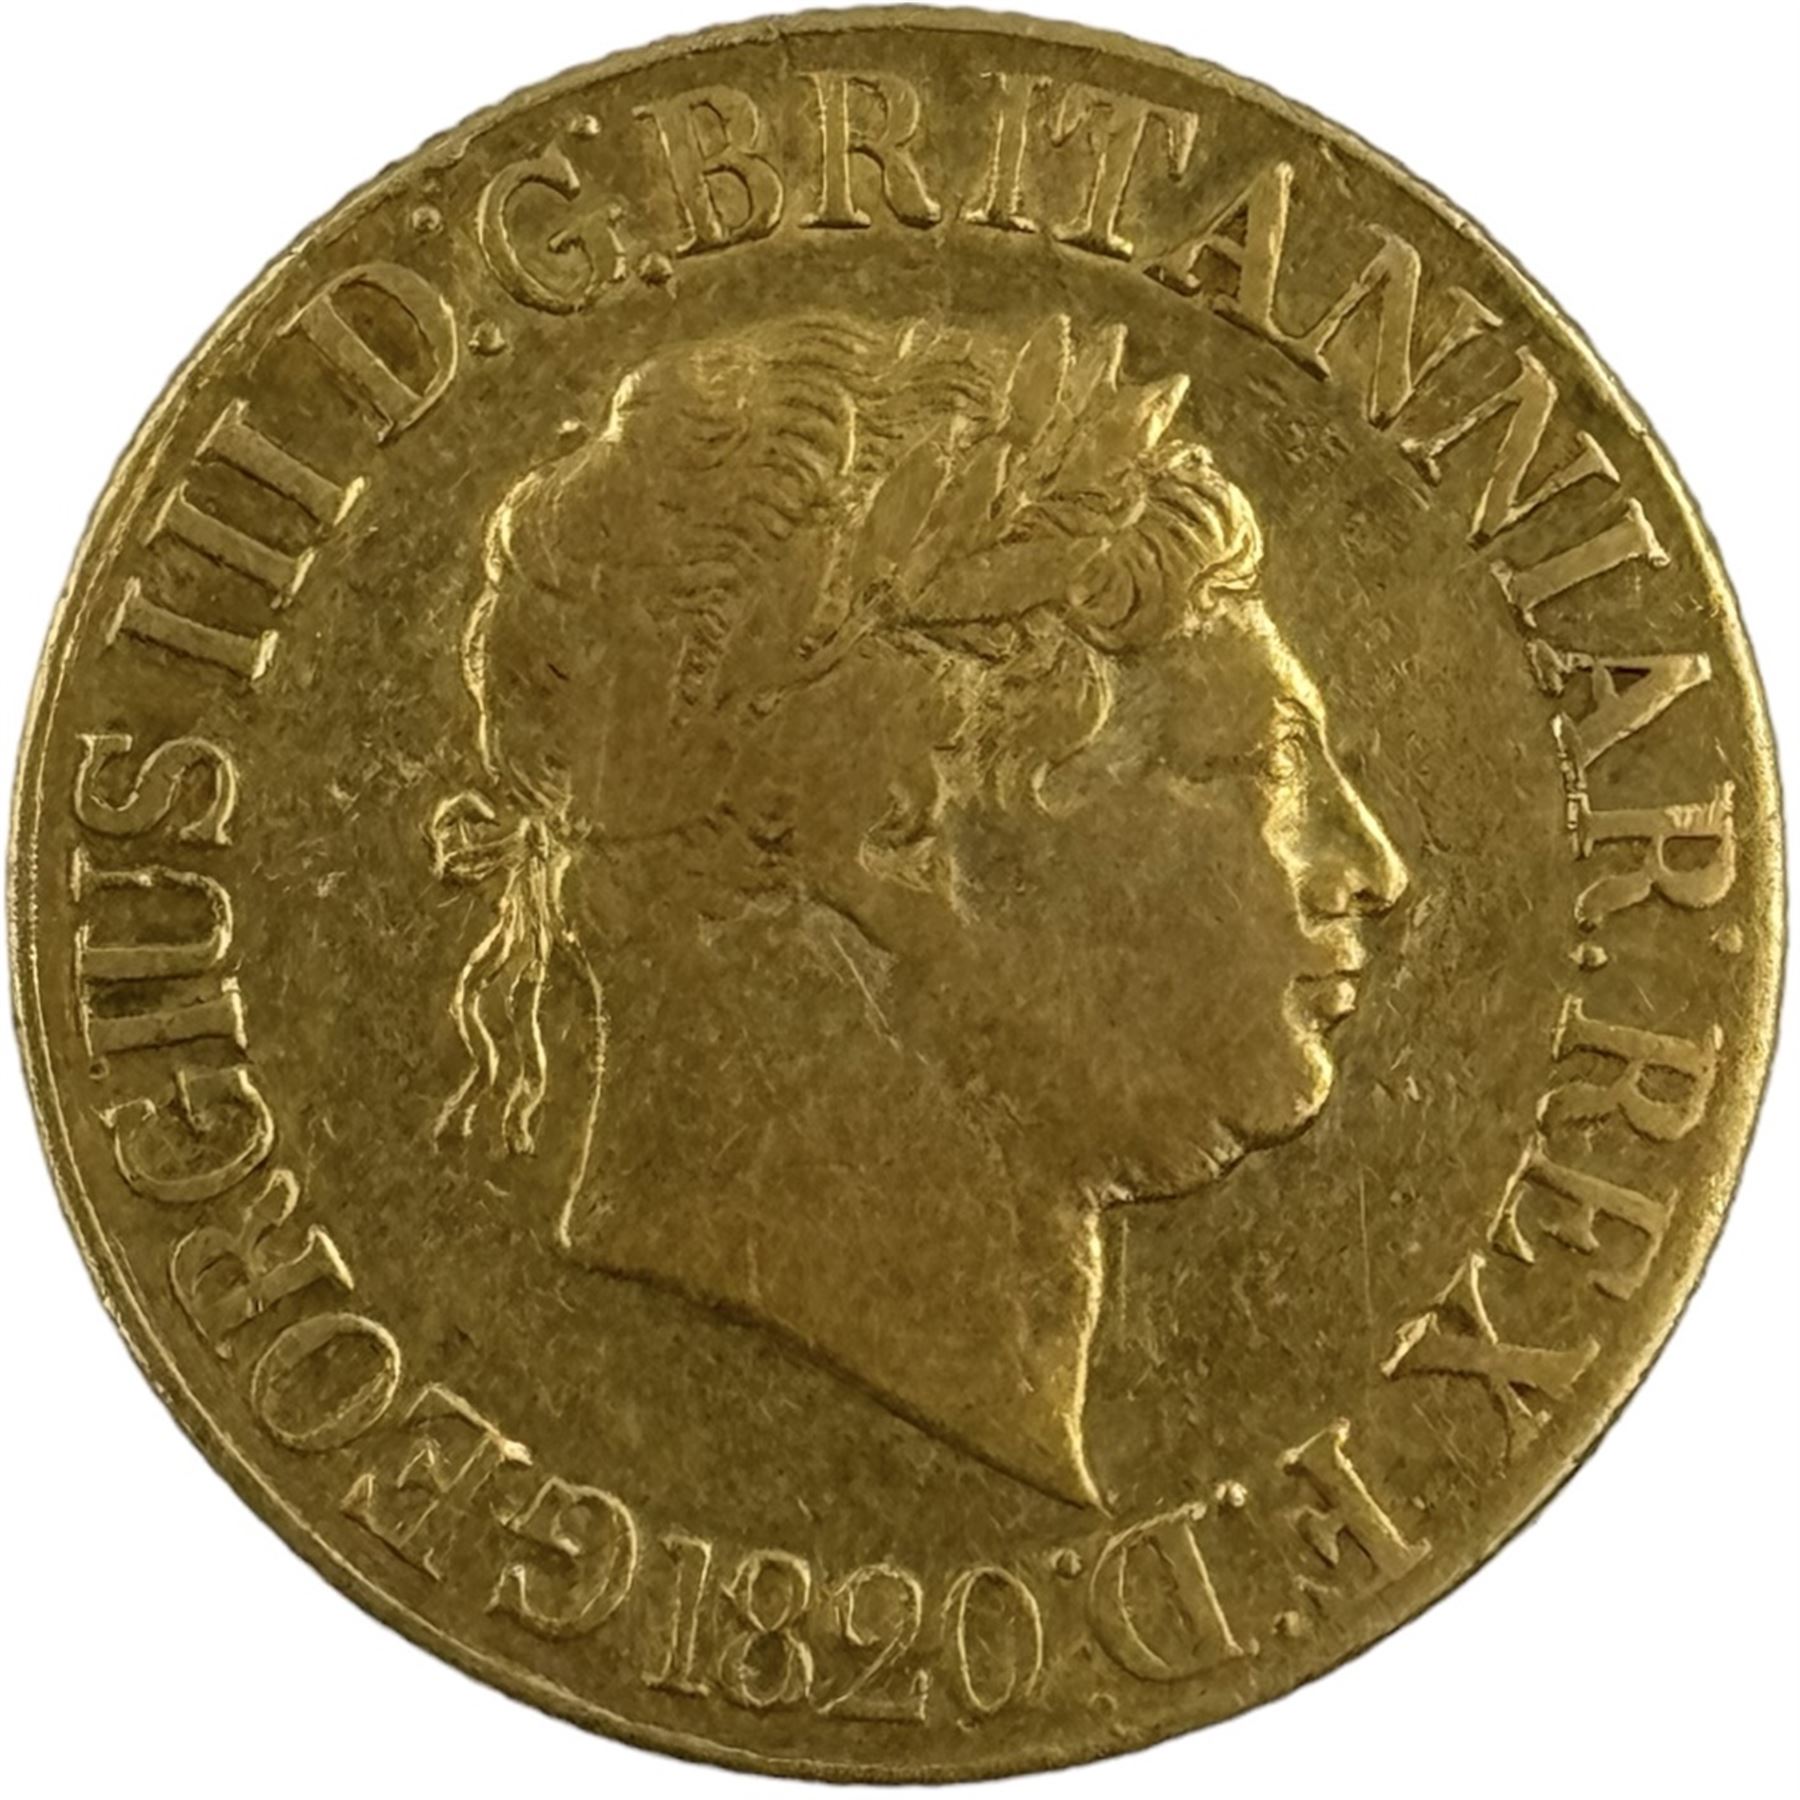 George III 1820 gold full sovereign coin